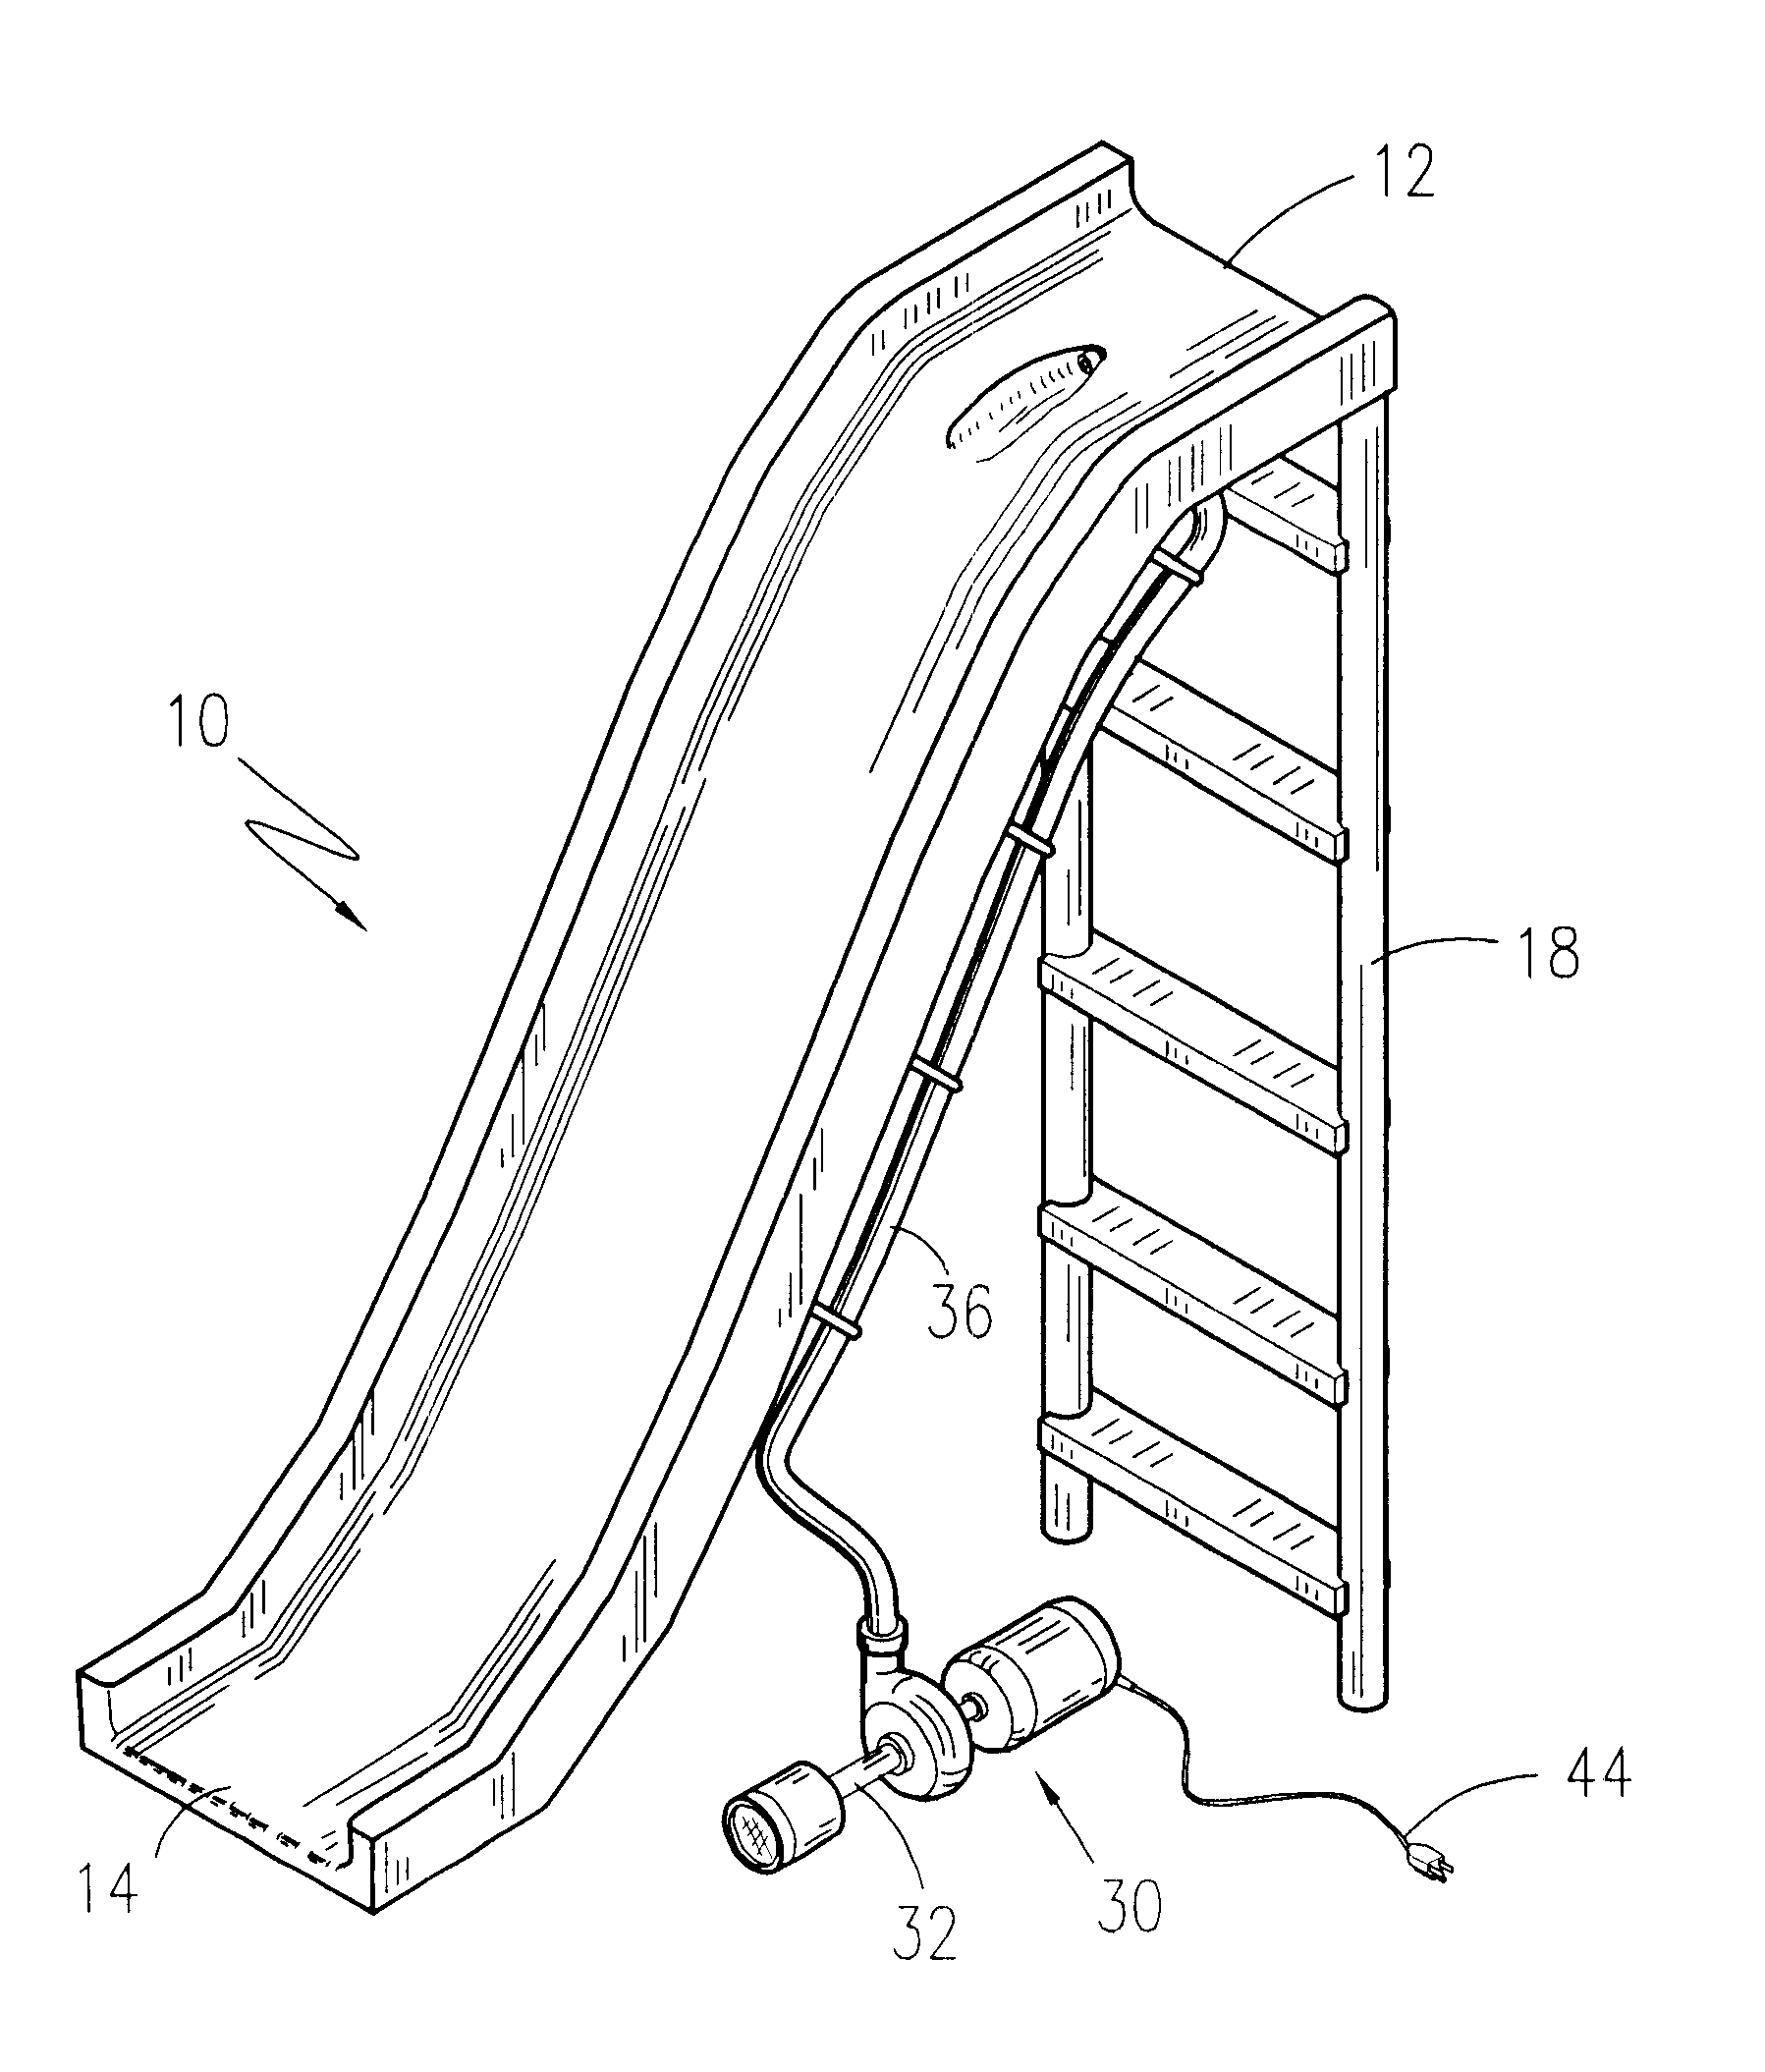 Self contained water slide for individual yard use